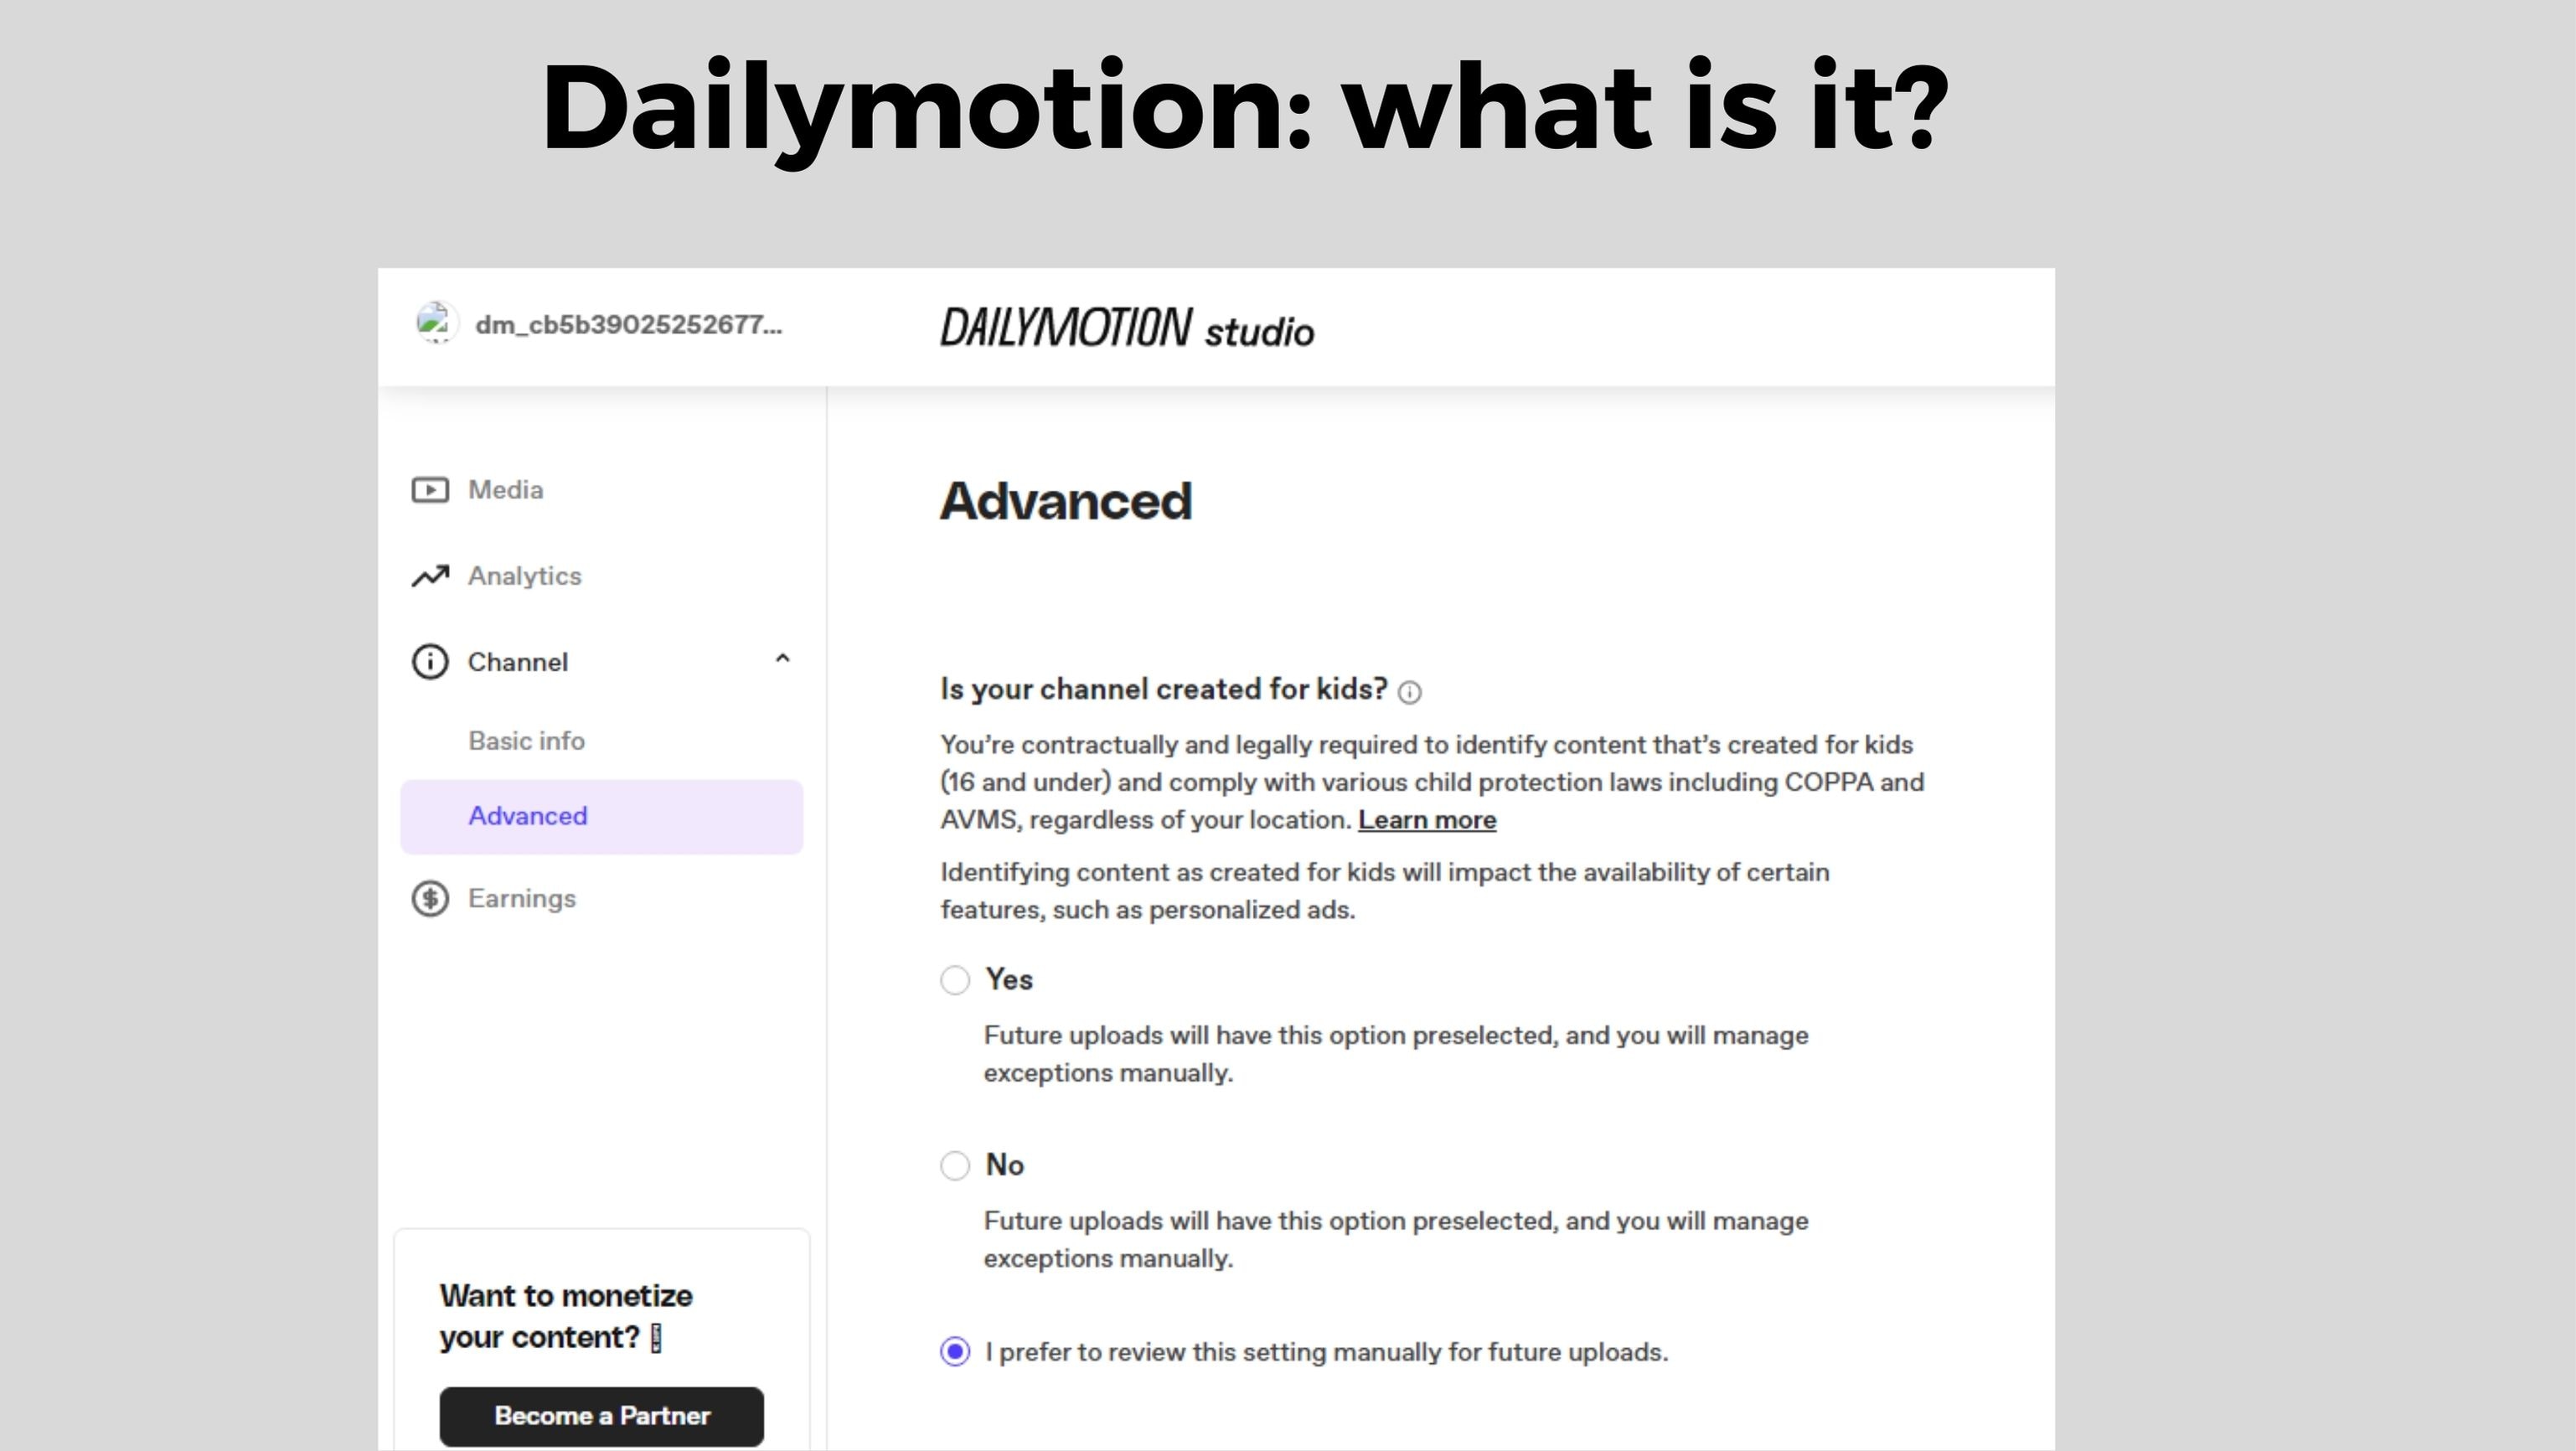 dailymotion: what is it